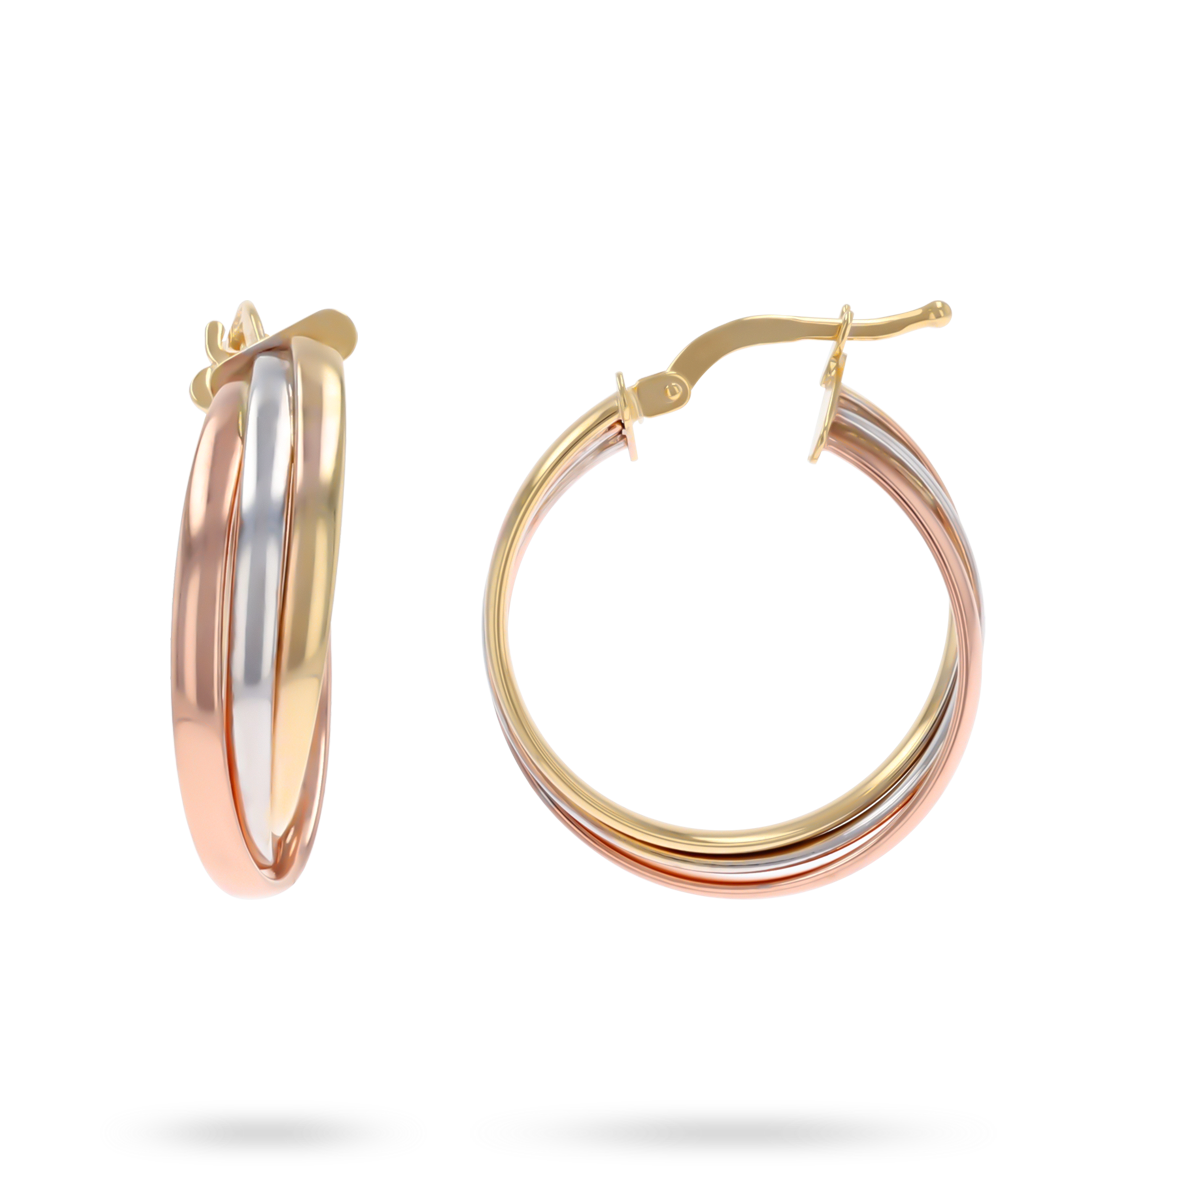 9ct Three Colour Gold Round Hoop Earrings